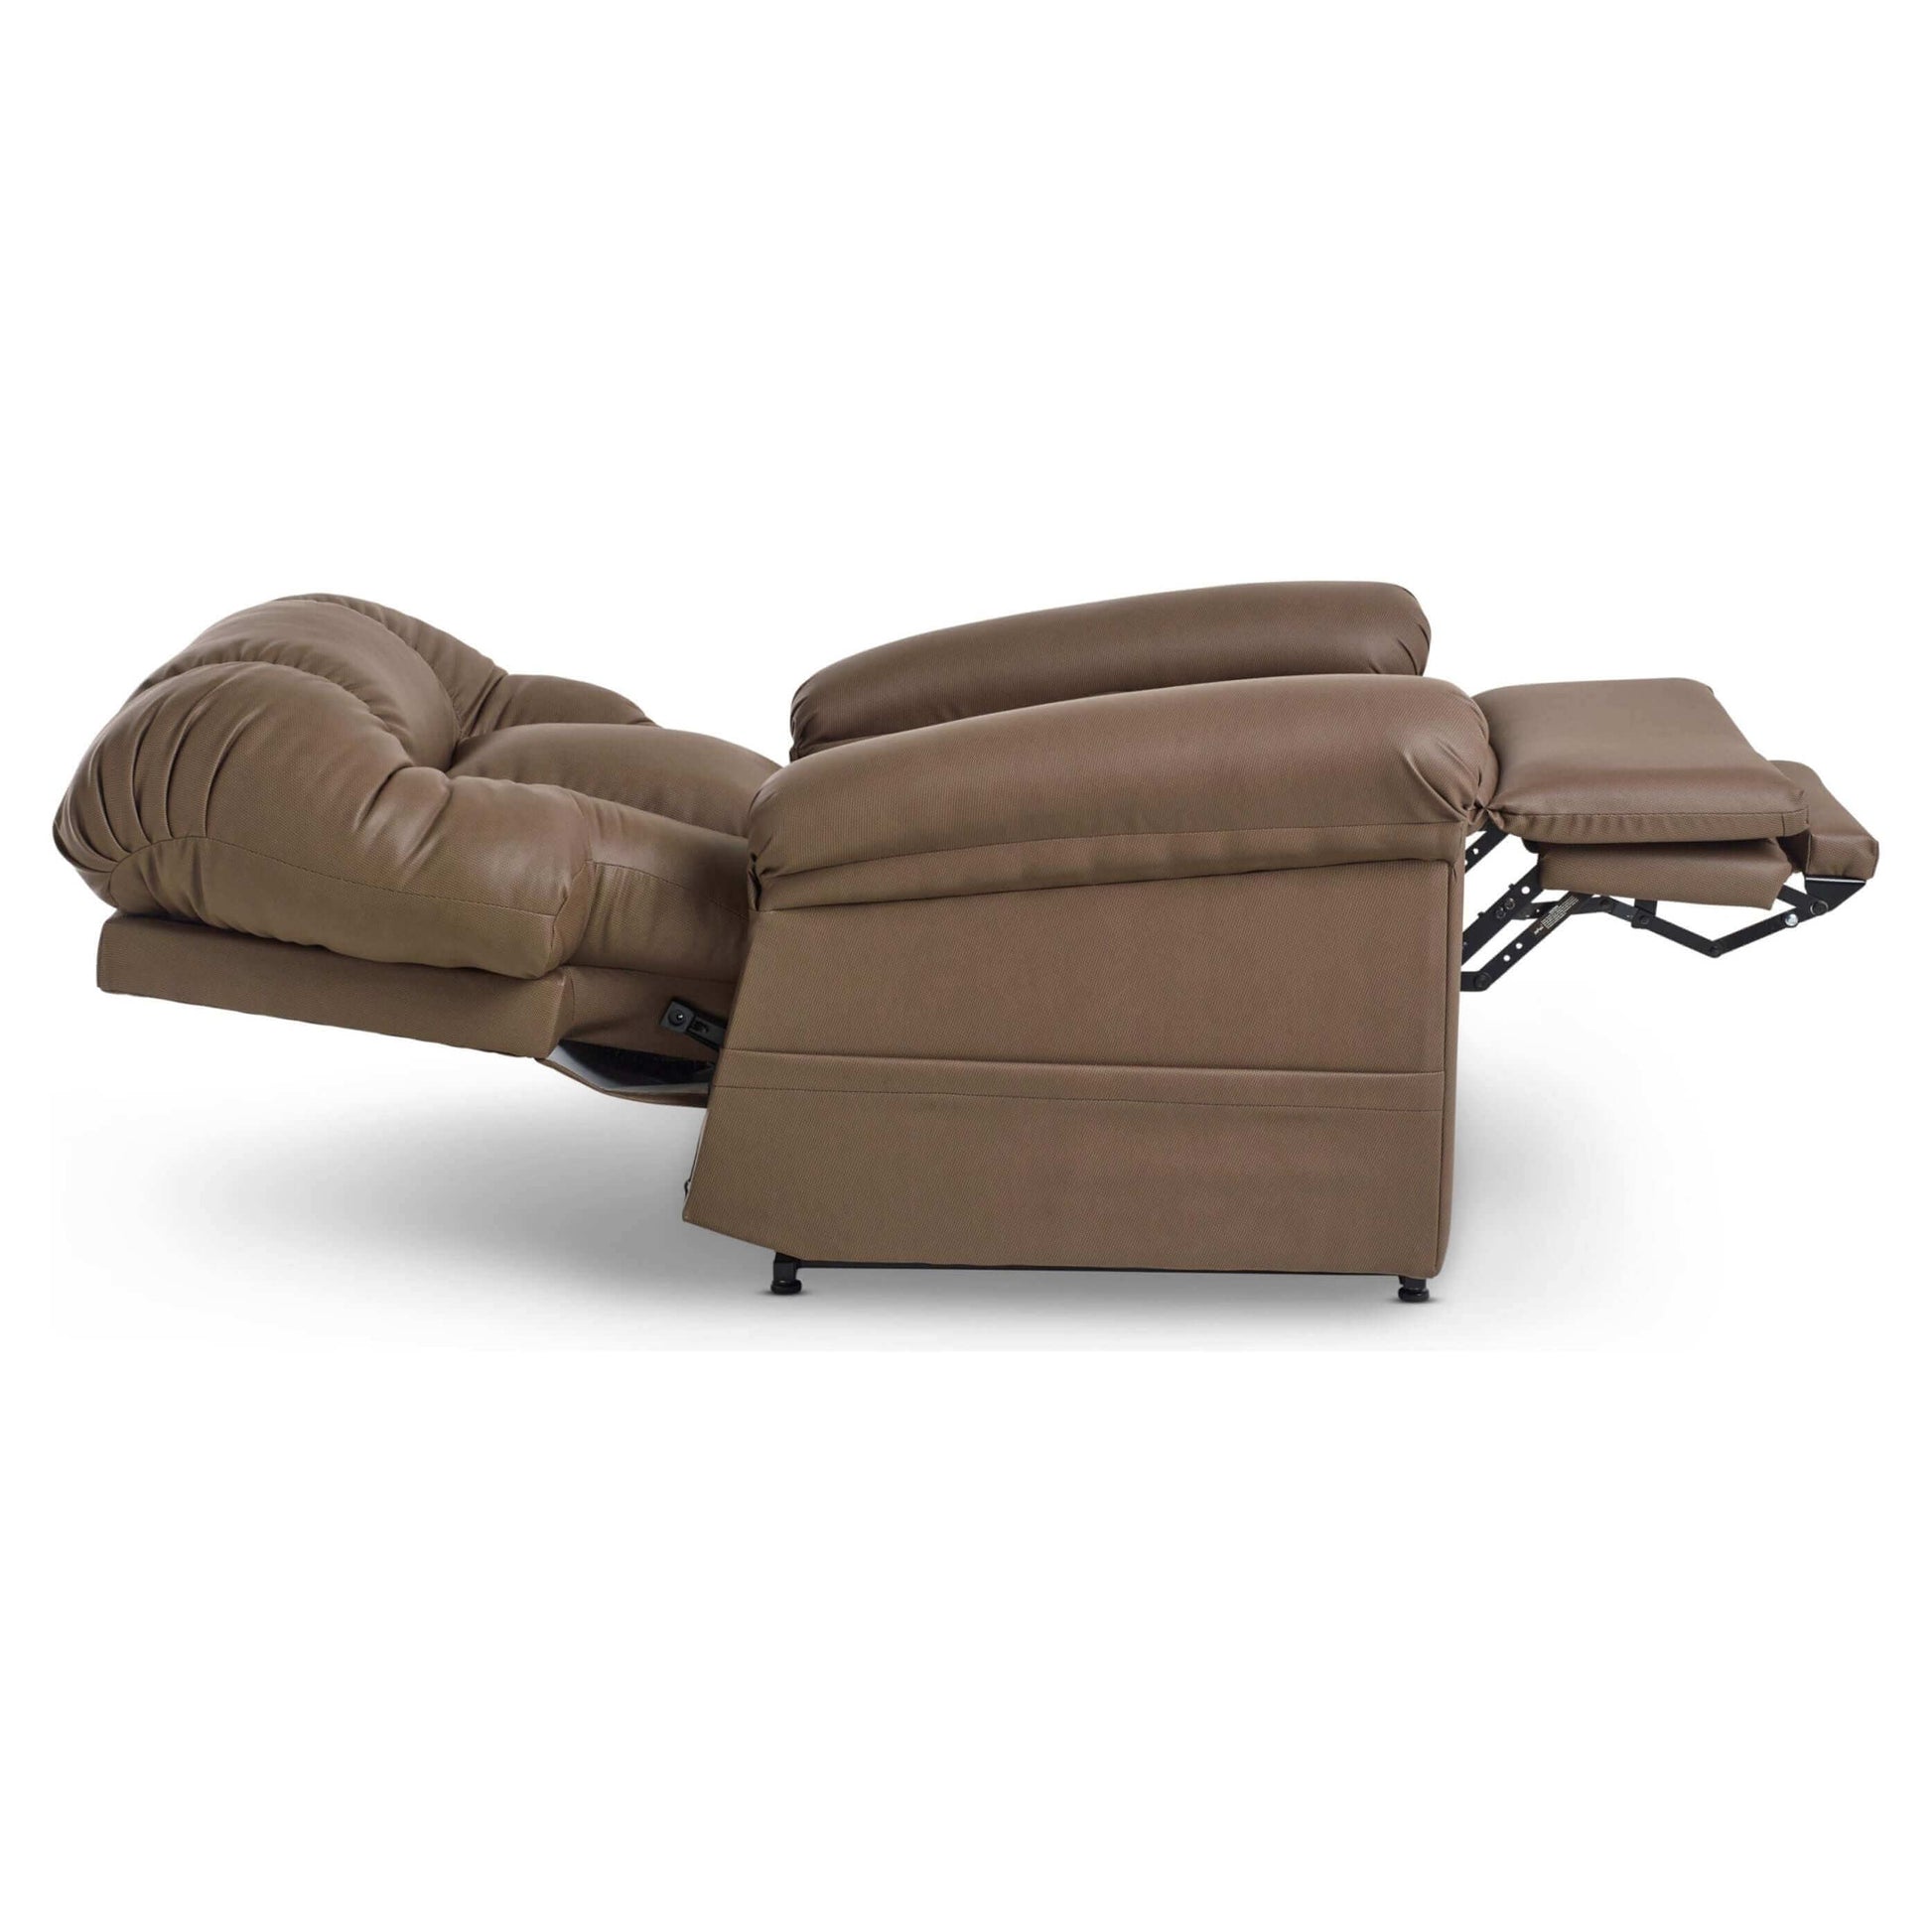 Perfect Sleep Chair covered in chocolate Miralux fabric, reclined to layflat sleeping position with footrest raised